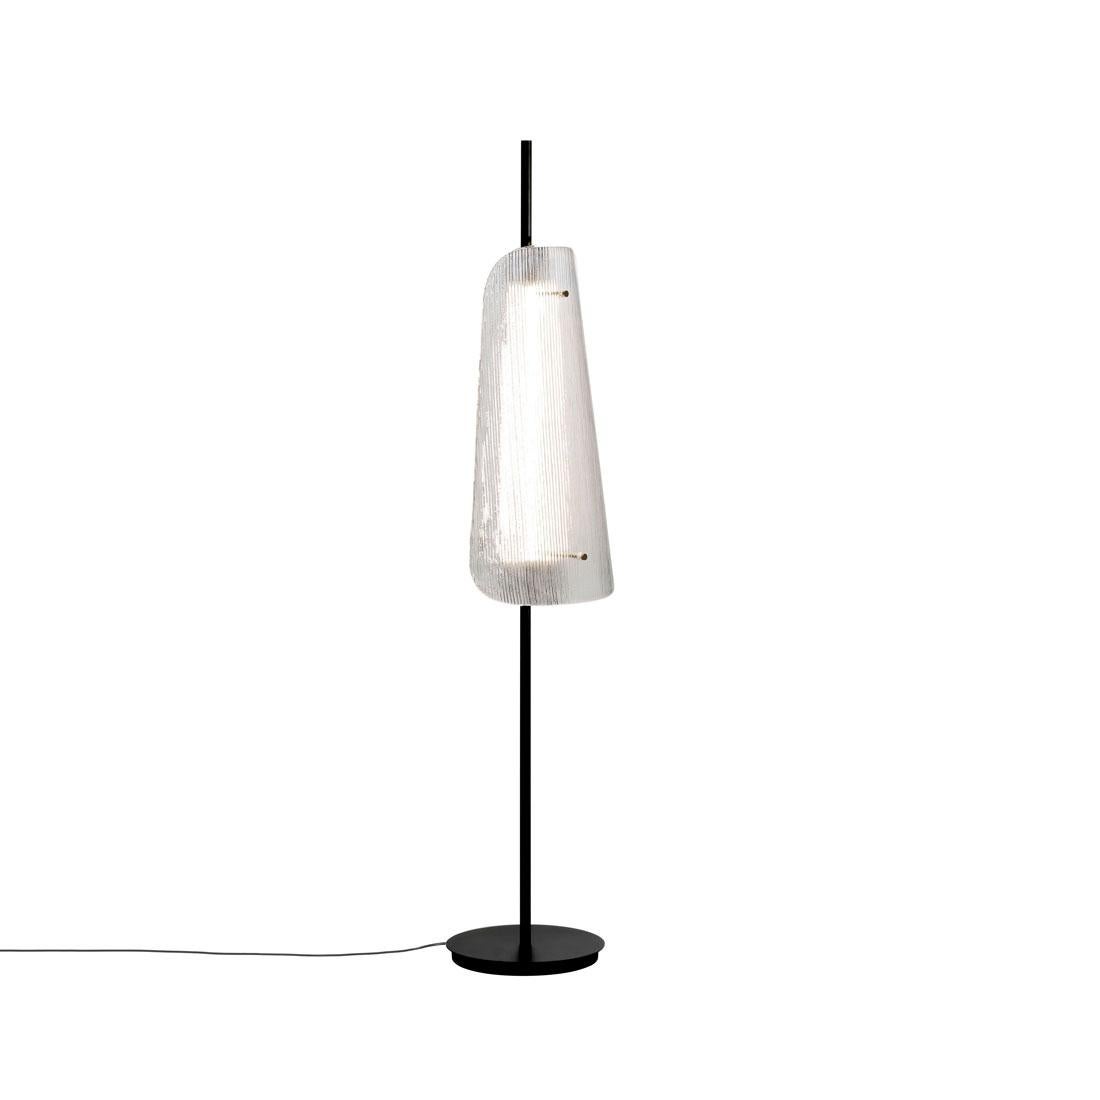 Bent floor light, European, Minimalist, transparent, champagne base, German, lighting, bent one, lighting, 21st century

Resembling a lampshade but with a room-filling presence, bent is characterized by its curved section of glass (single or